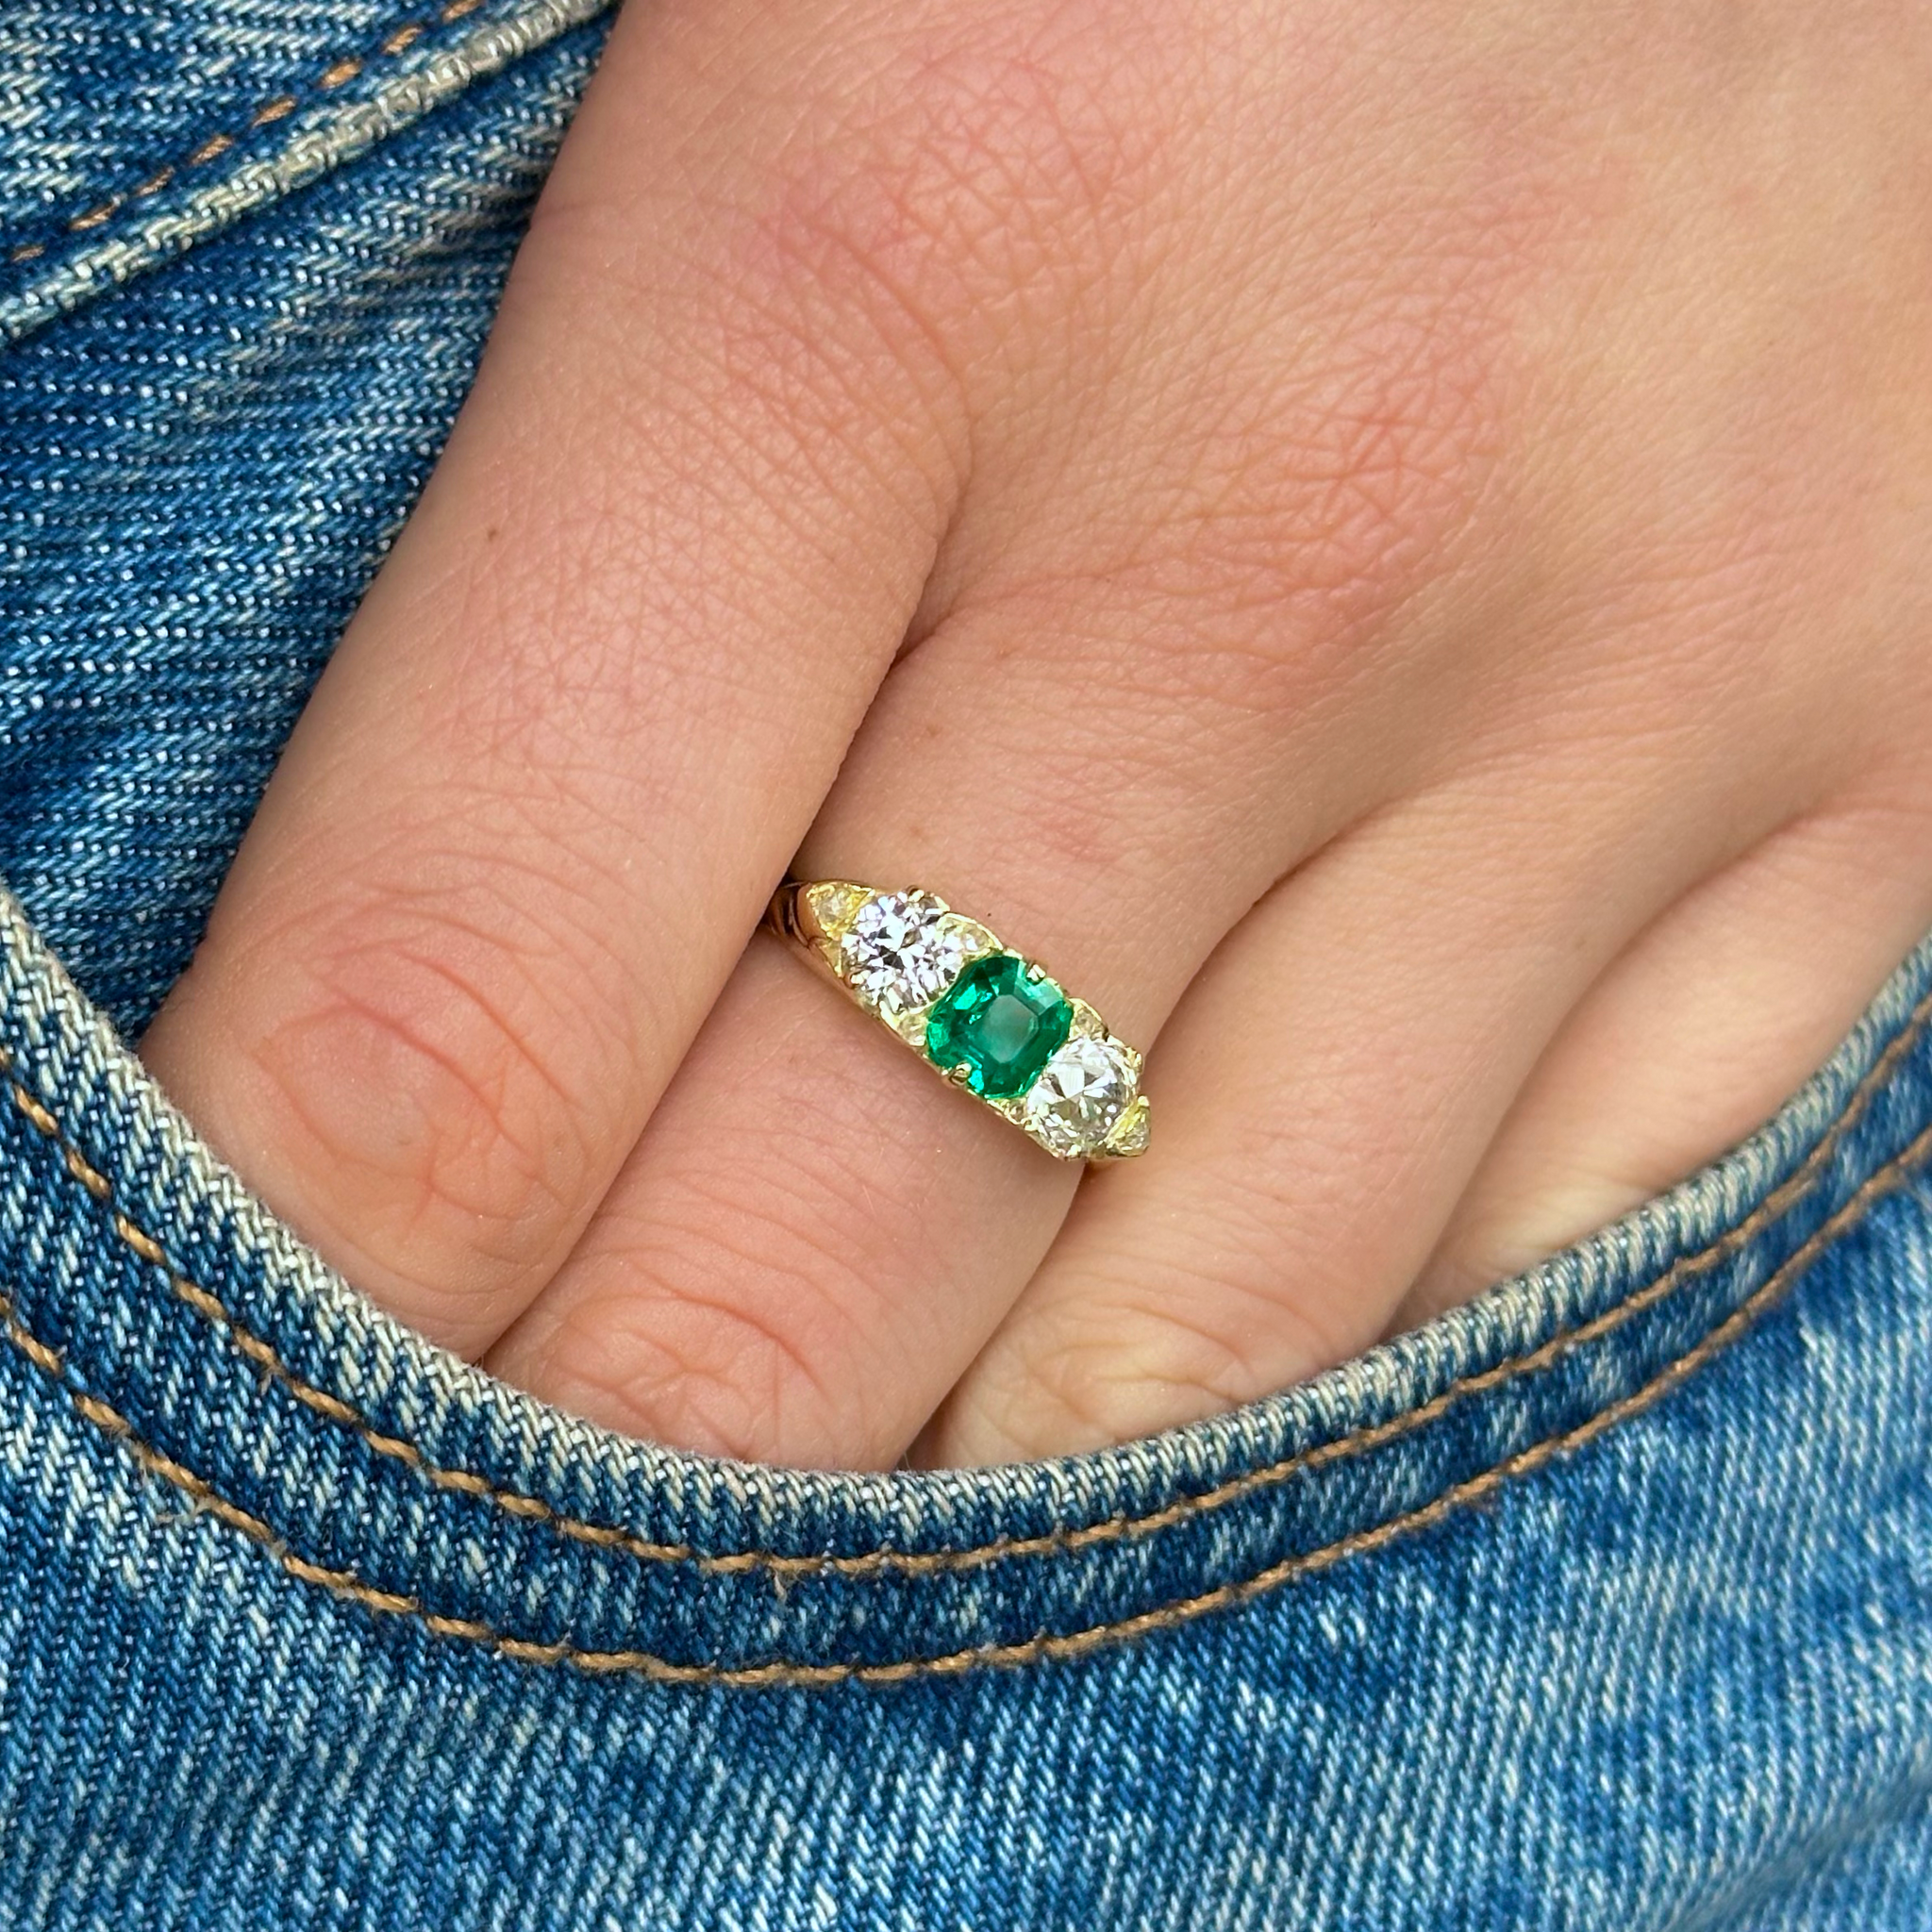 Antique emerald and diamond three stone ring, worn on hand in pocket of jeans